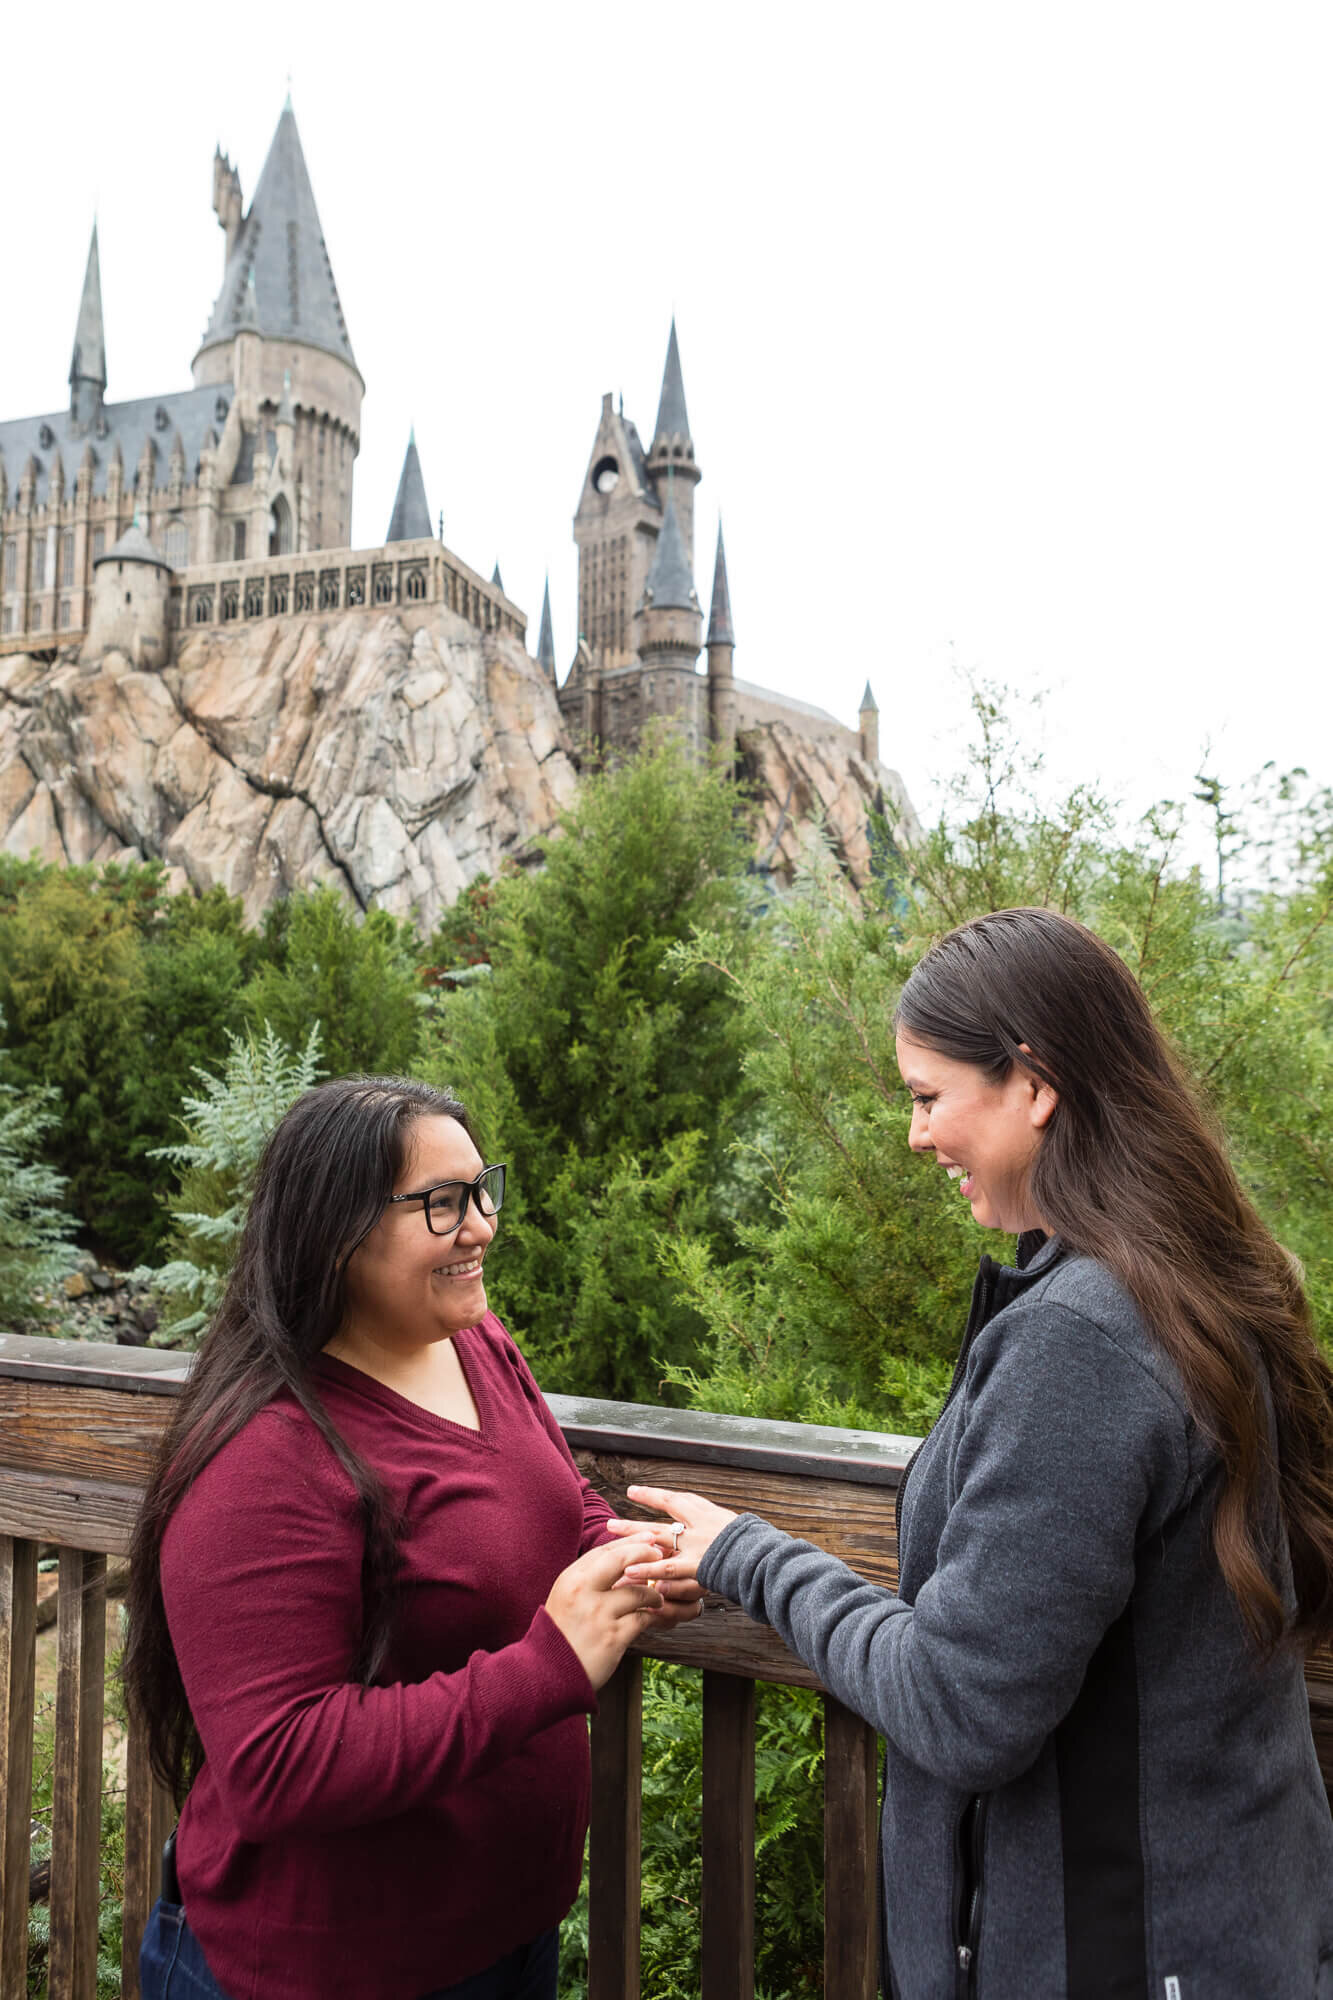  Harry Potter themed marriage Proposal at Universal Orlando, Florida 